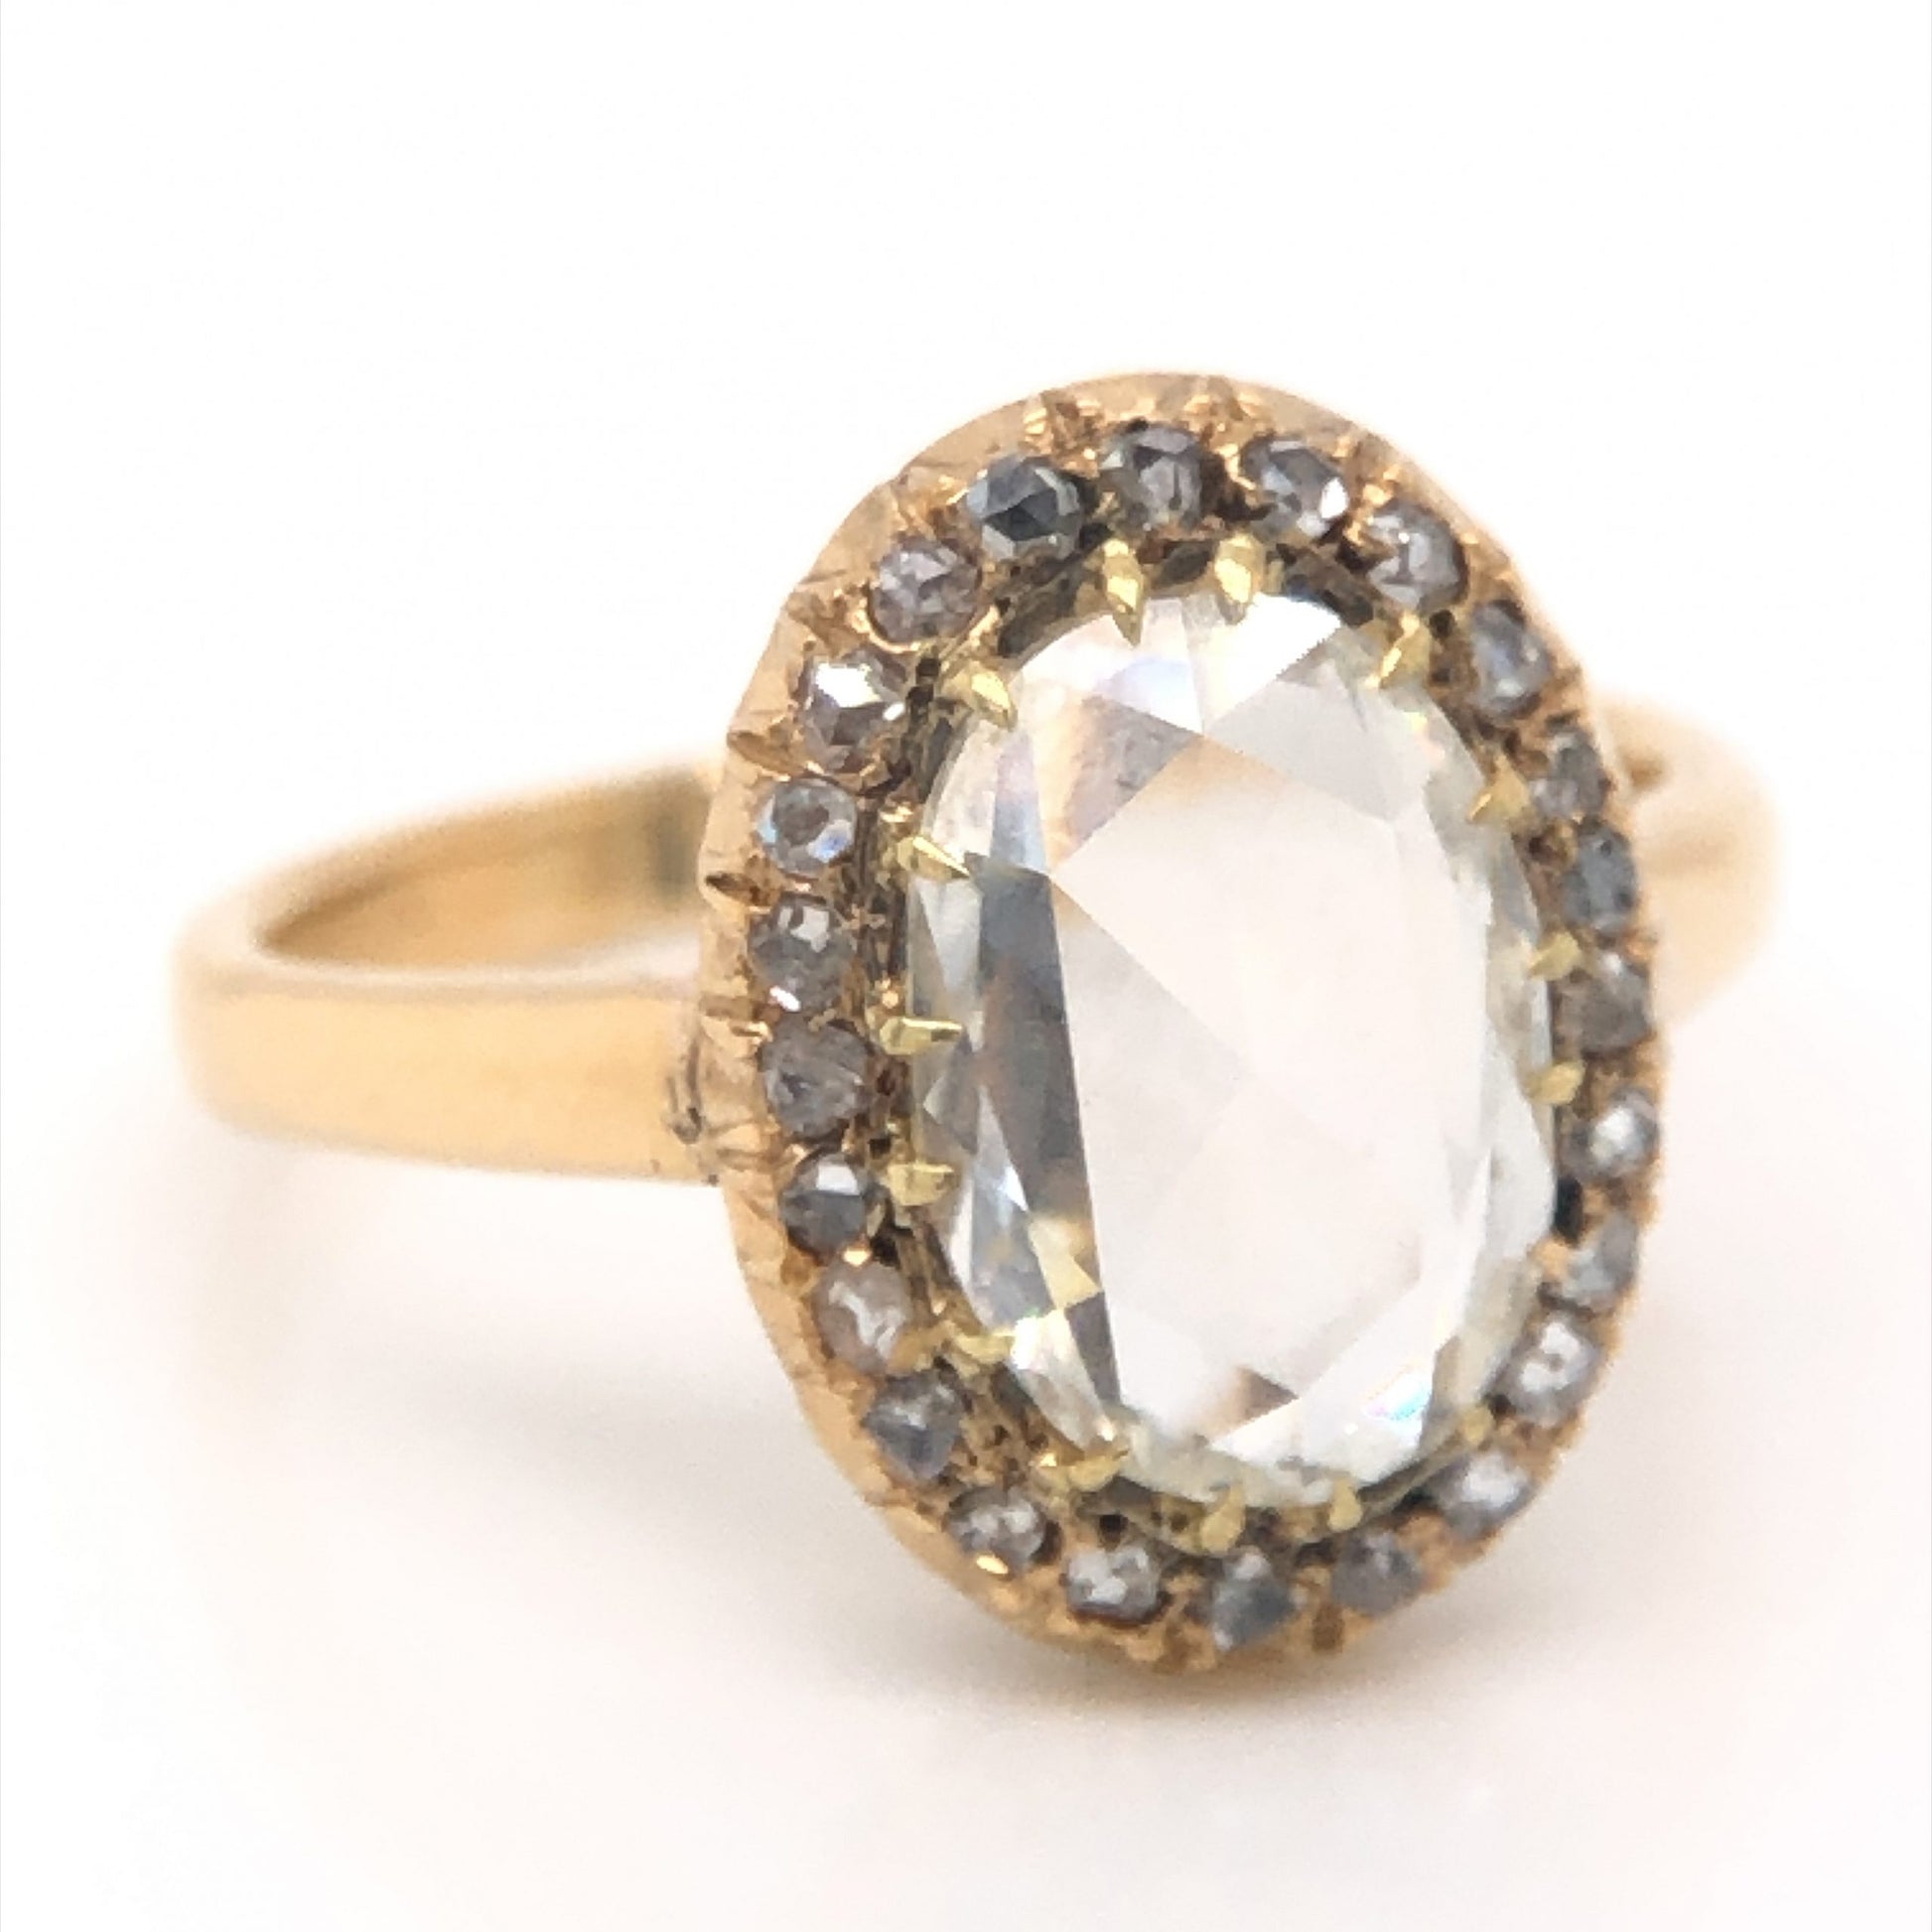 Victorian 1.52 Rose Cut Diamond Engagement Ring in 15k Yellow Gold